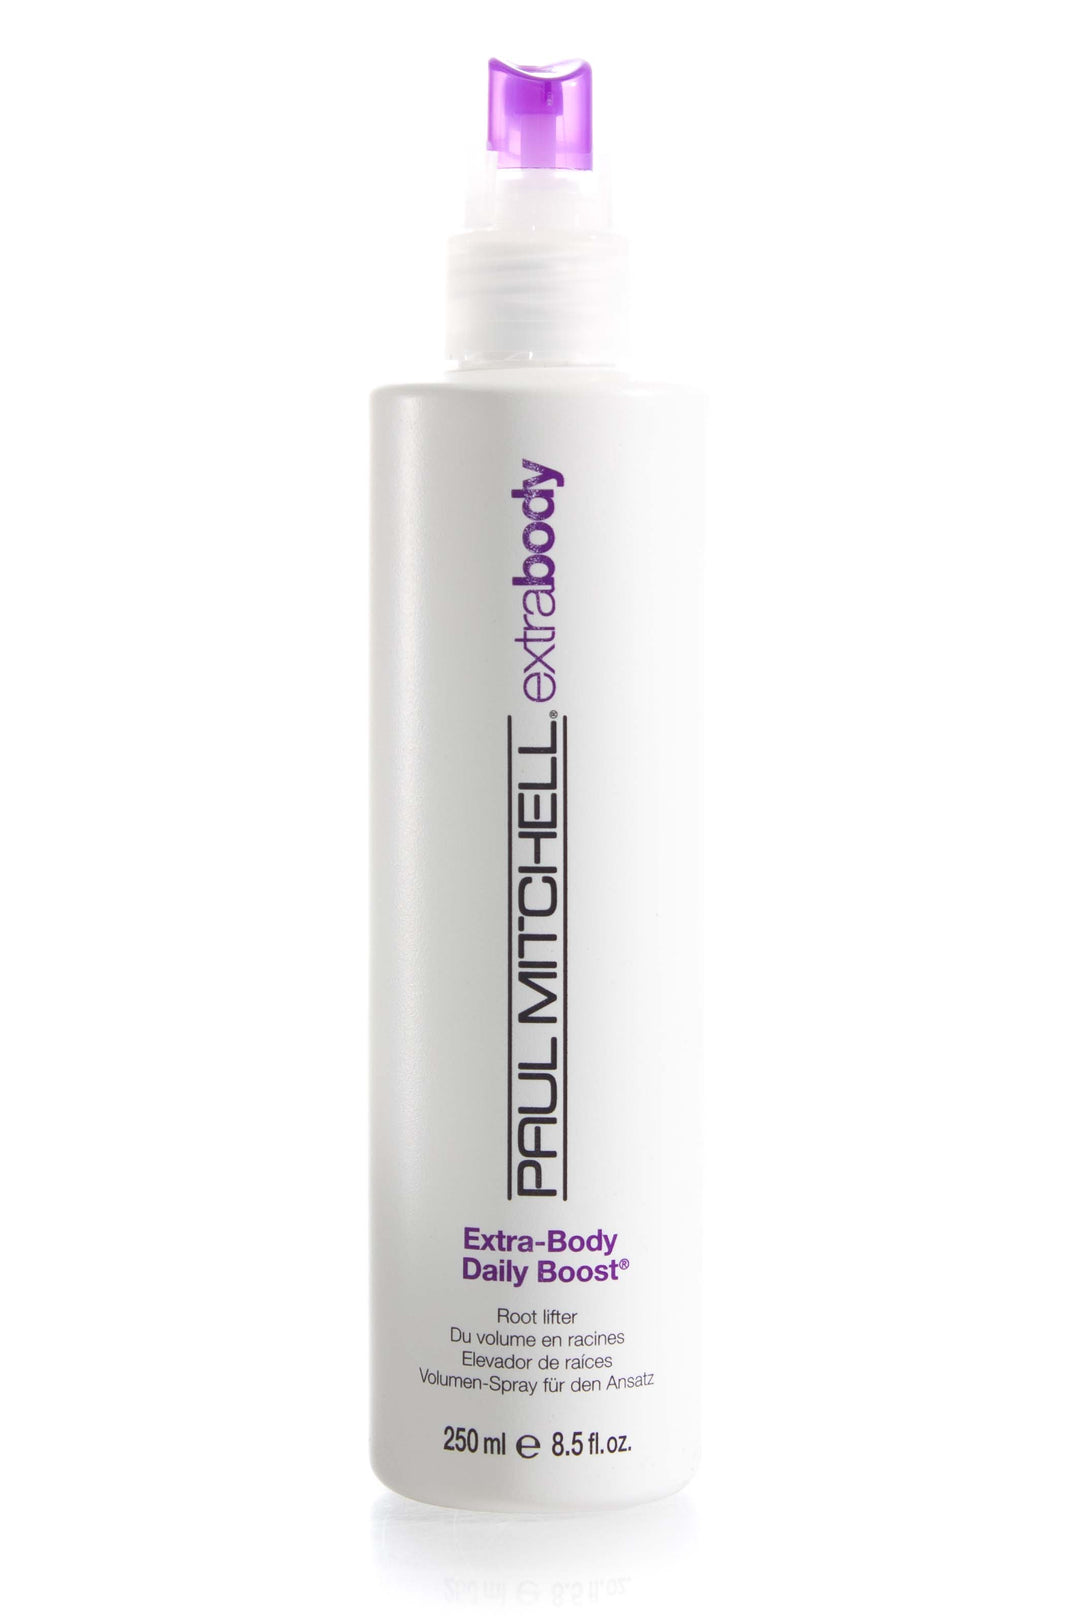 paul-mitchell-extra-body-daily-boost-250ml